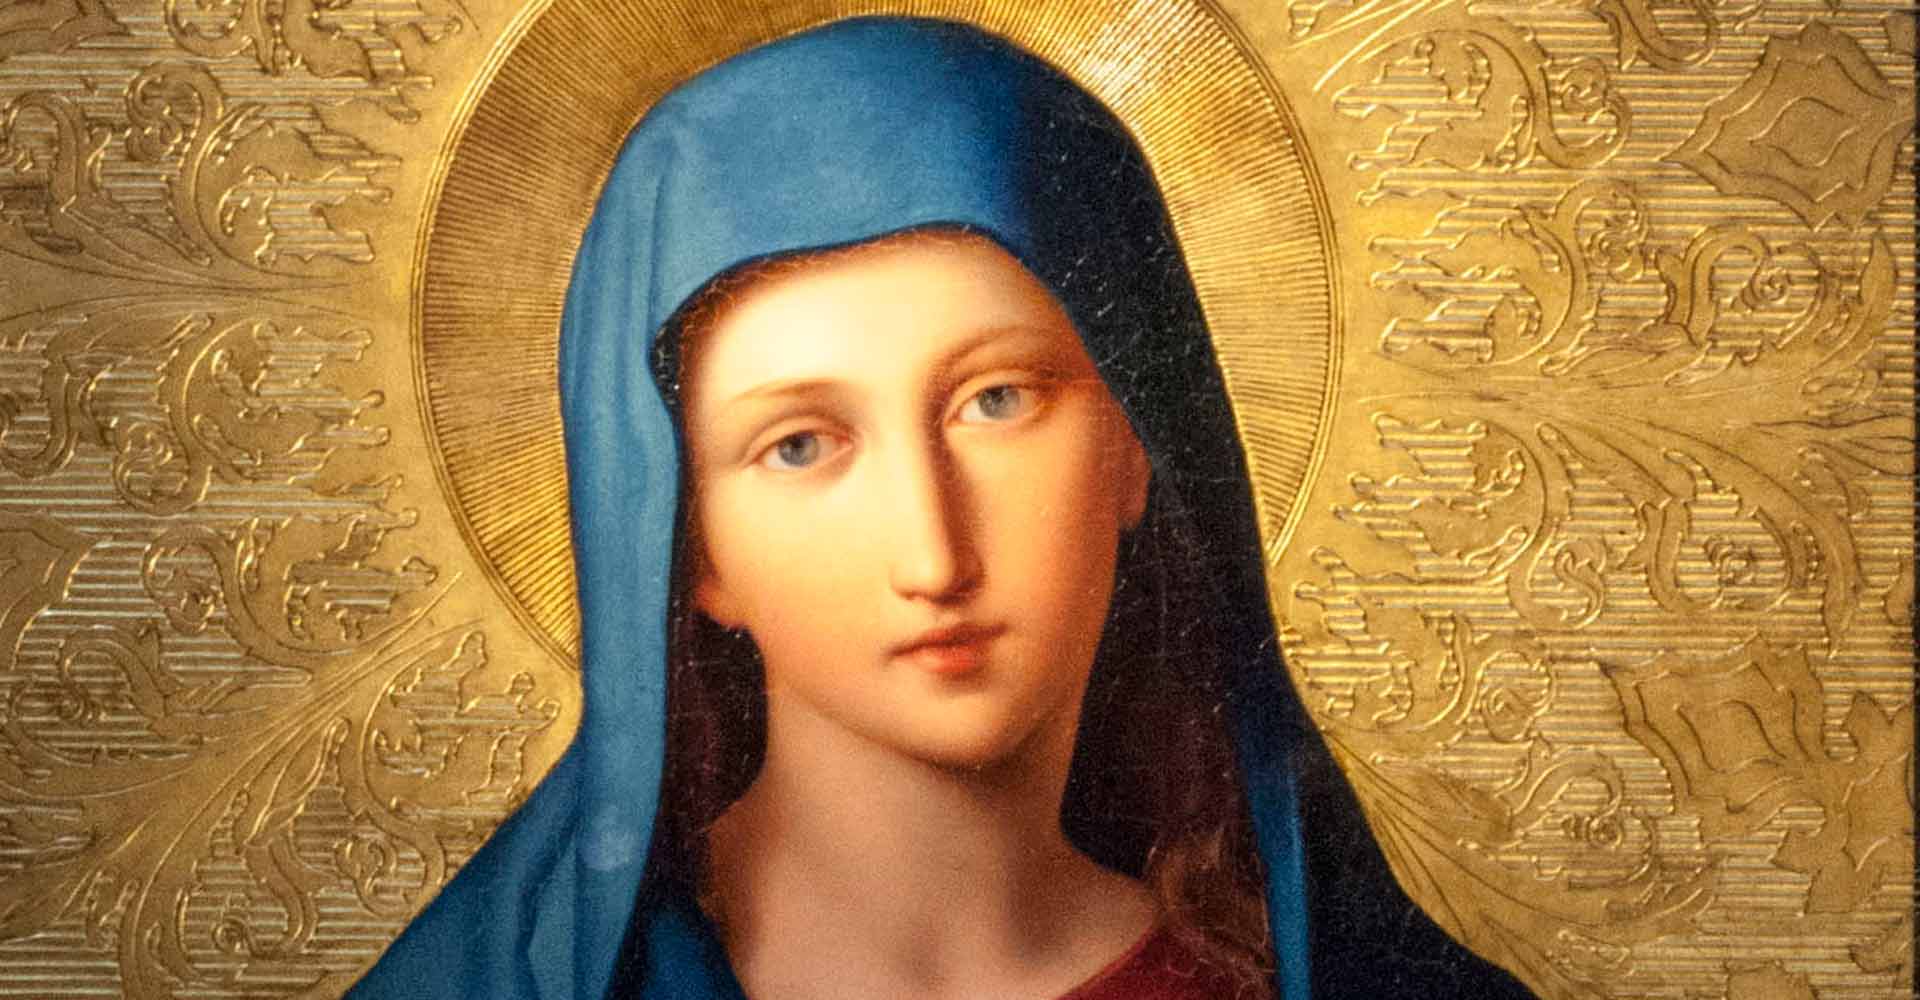 The Immaculate Heart of Mary: Gateway to Holiness, Purity and Love